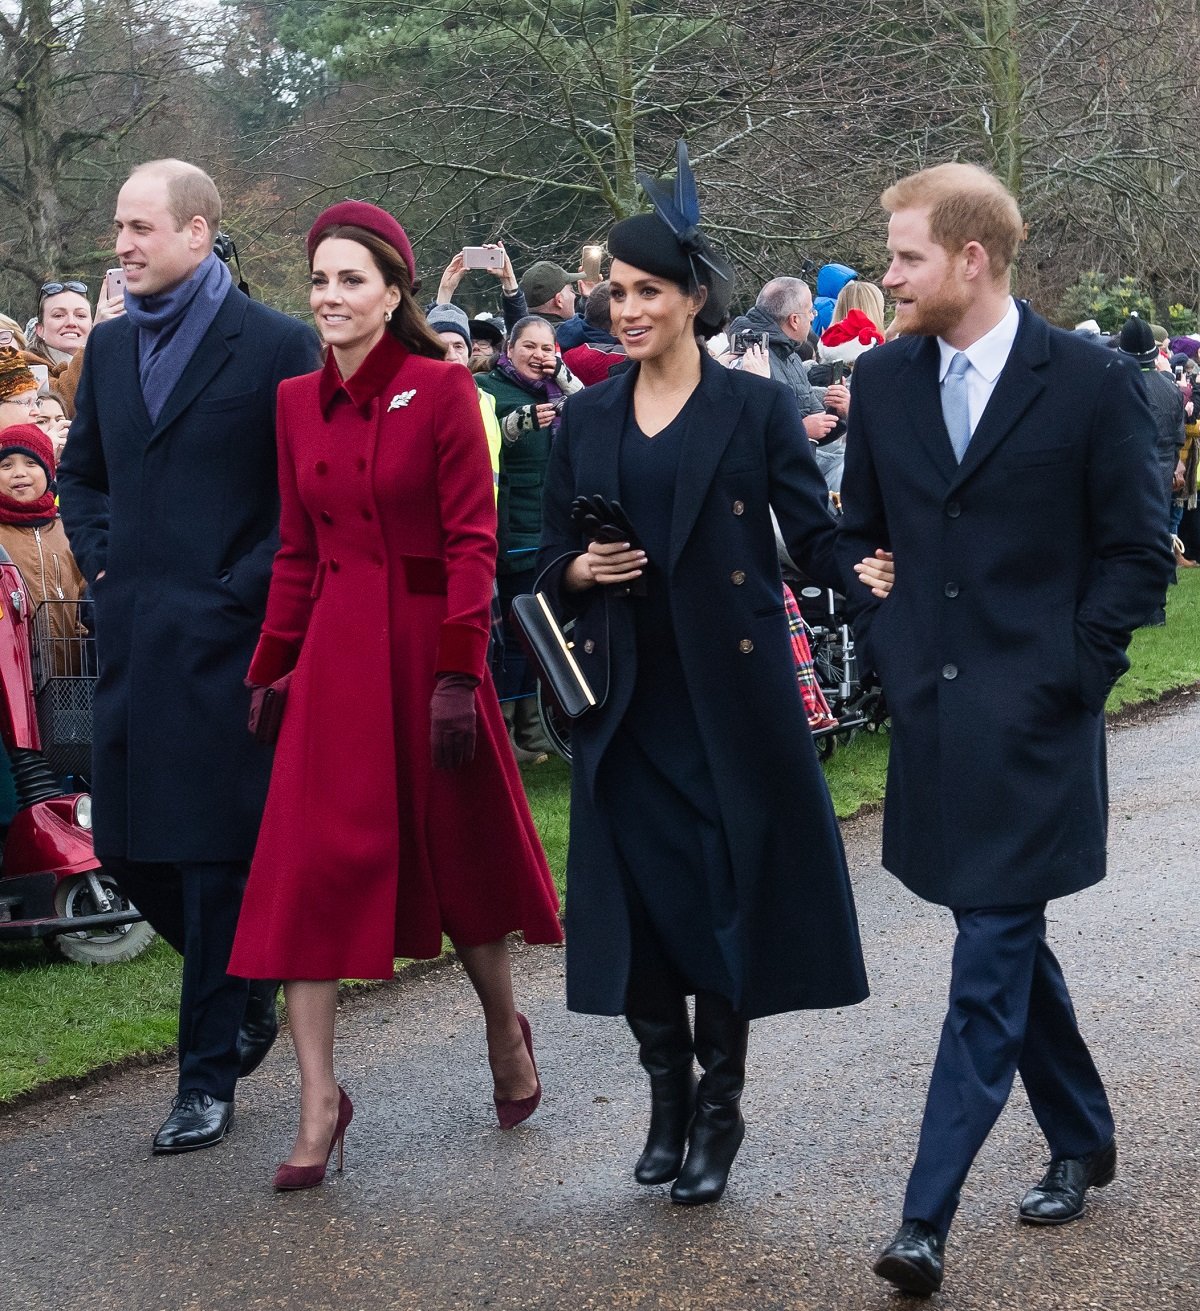 Prince William, Kate Middleton, Prince Harry, and Meghan Markle walking to Christmas Day church service